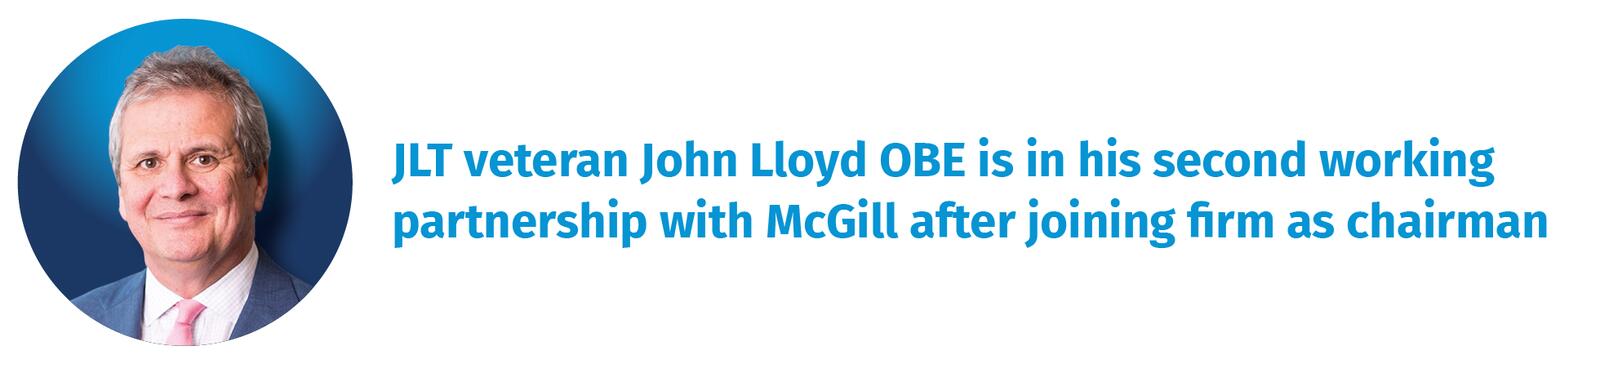 JLT veteran John Lloyd OBE is in his second working partnership with McGill after joining firm as chairman 